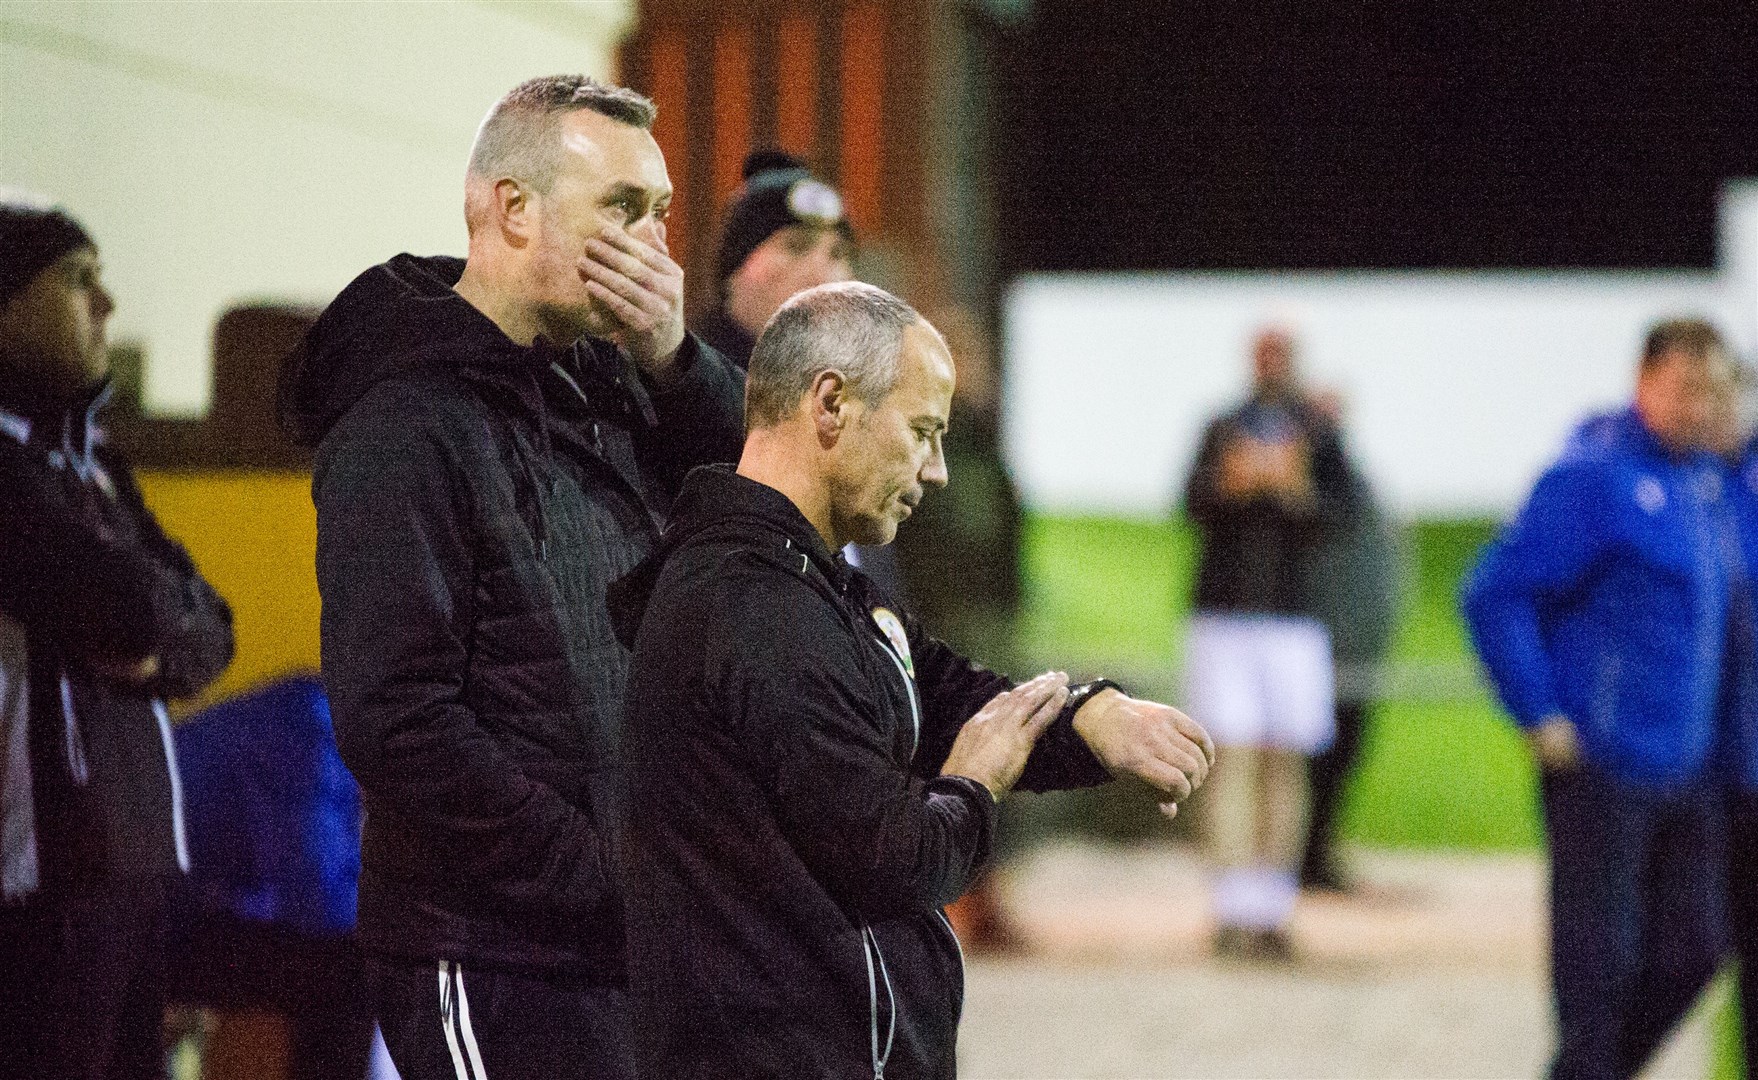 Gordon Connelly checks his watch as half-time approaches, with a shocked Steven Macdonald looking on. Picture: Becky Saunderson